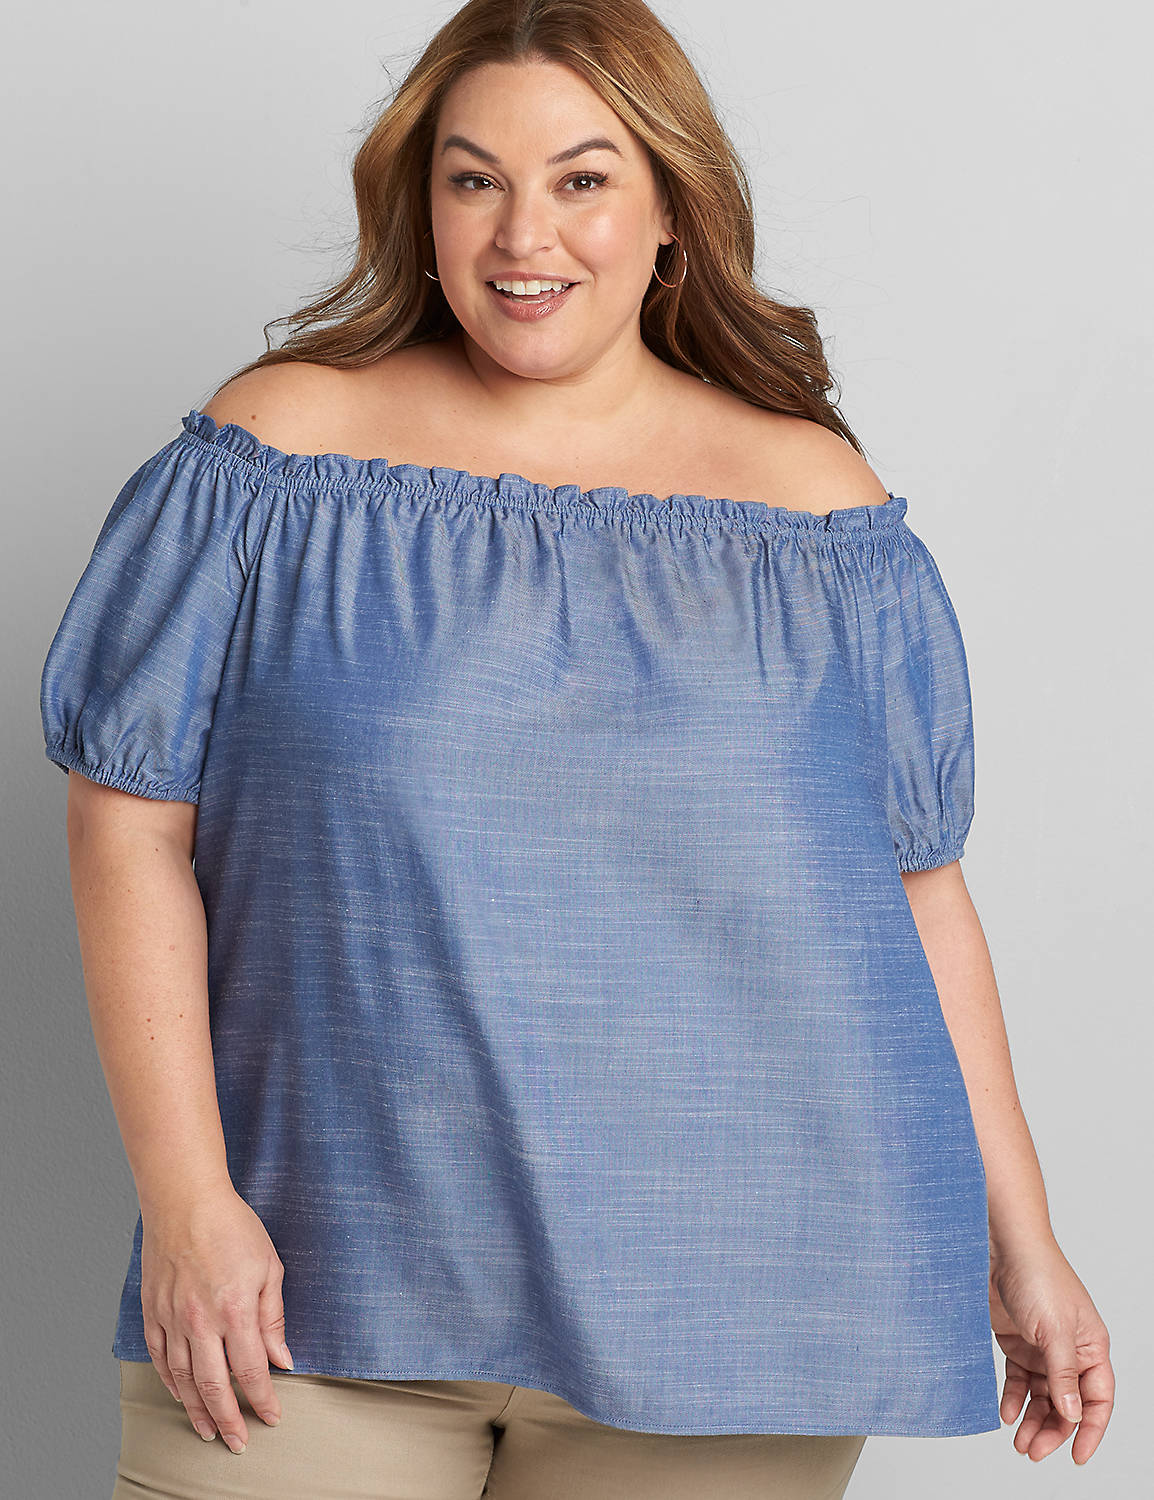 Short Puff Sleeve Off The Shoulder Chambray Top 1119589:Chambray:14/16 Product Image 1